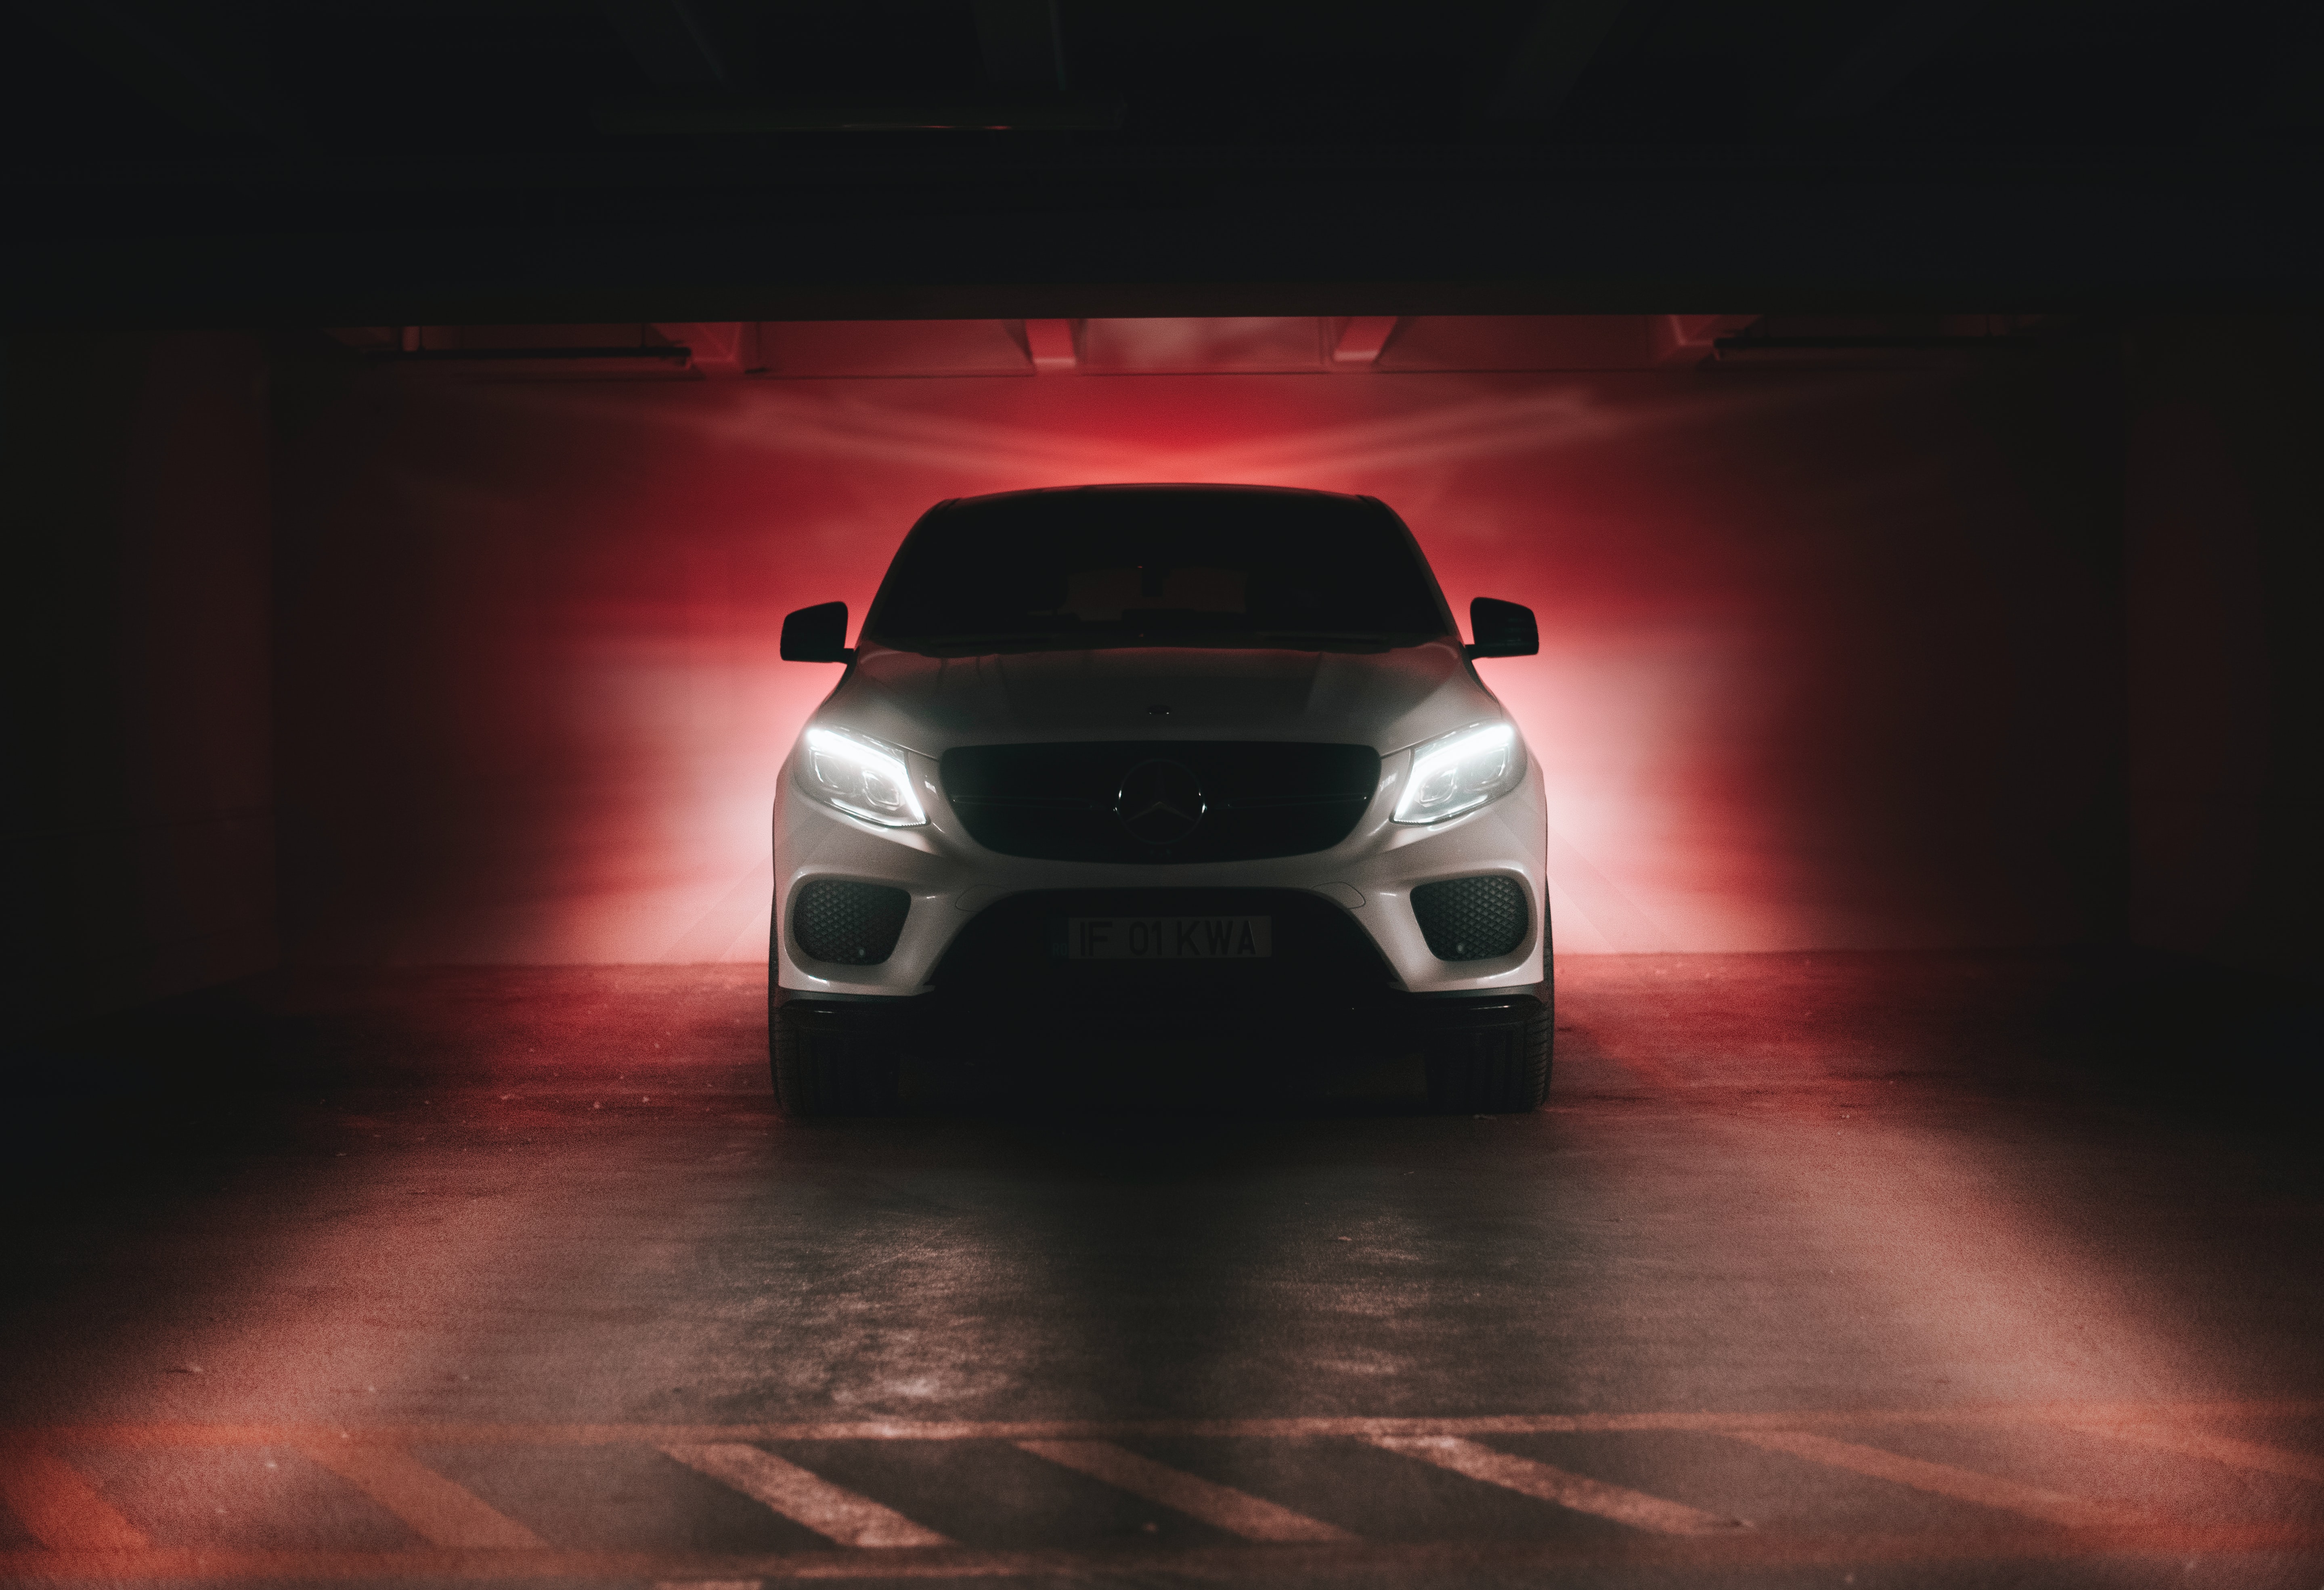 119340 free wallpaper 1080x2400 for phone, download images glow, front view, cars, mercedes benz gl 350d 1080x2400 for mobile